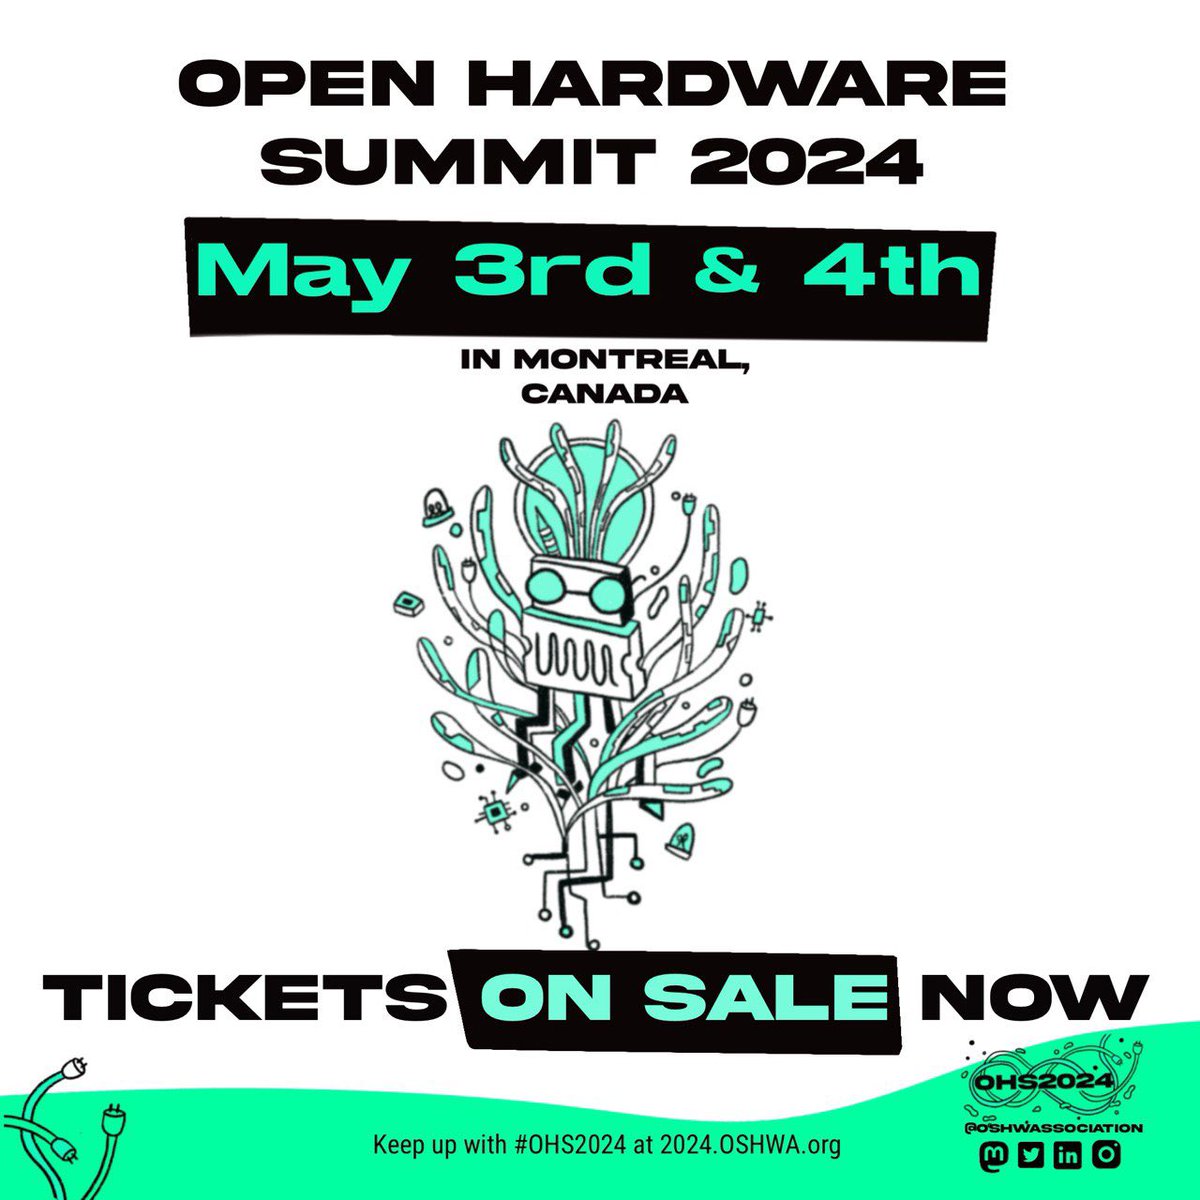 Tickets are on sale now for the 2024 Open Hardware Summit in Montreal, Canada! Make sure to grab your ticket ASAP to be able to participate in an incredible year of talks, workshops and more! Get yours here: 2024OpenHardwareSummit.eventbrite.com